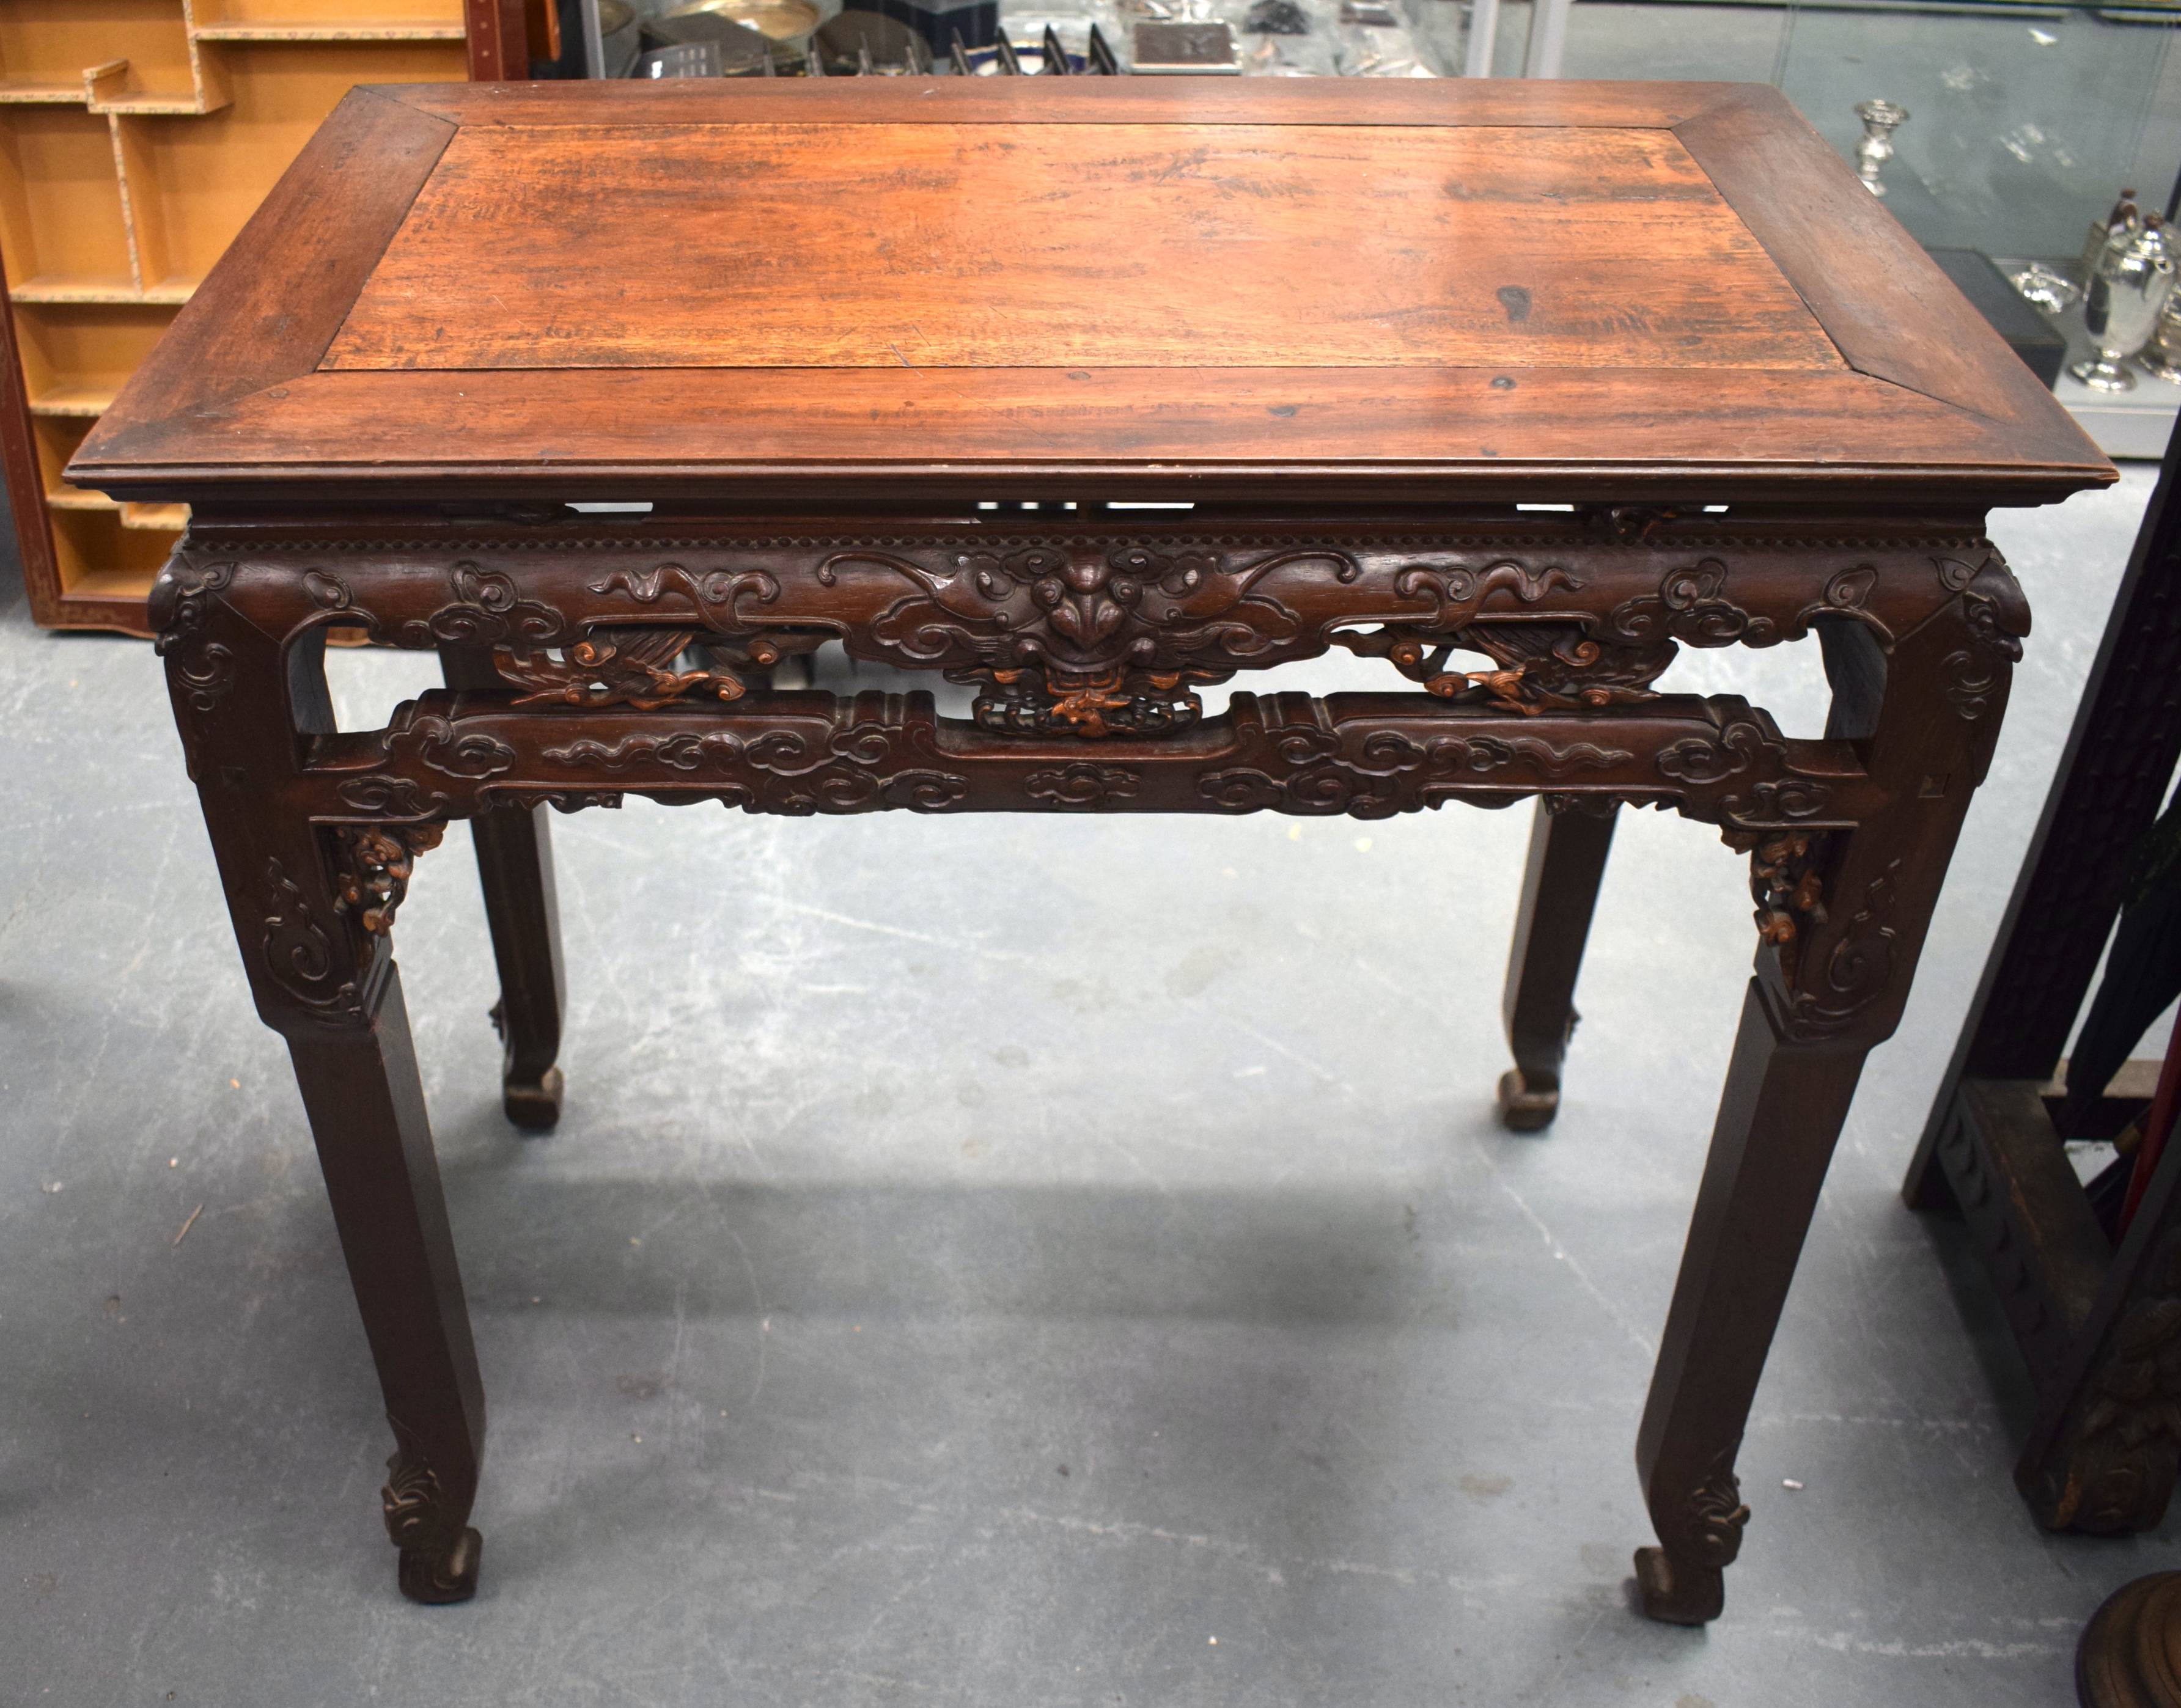 A FINE 19TH CENTURY CHINESE CARVED HONGMU HARDWOOD TABLE Qing, carved with mask heads and extensive